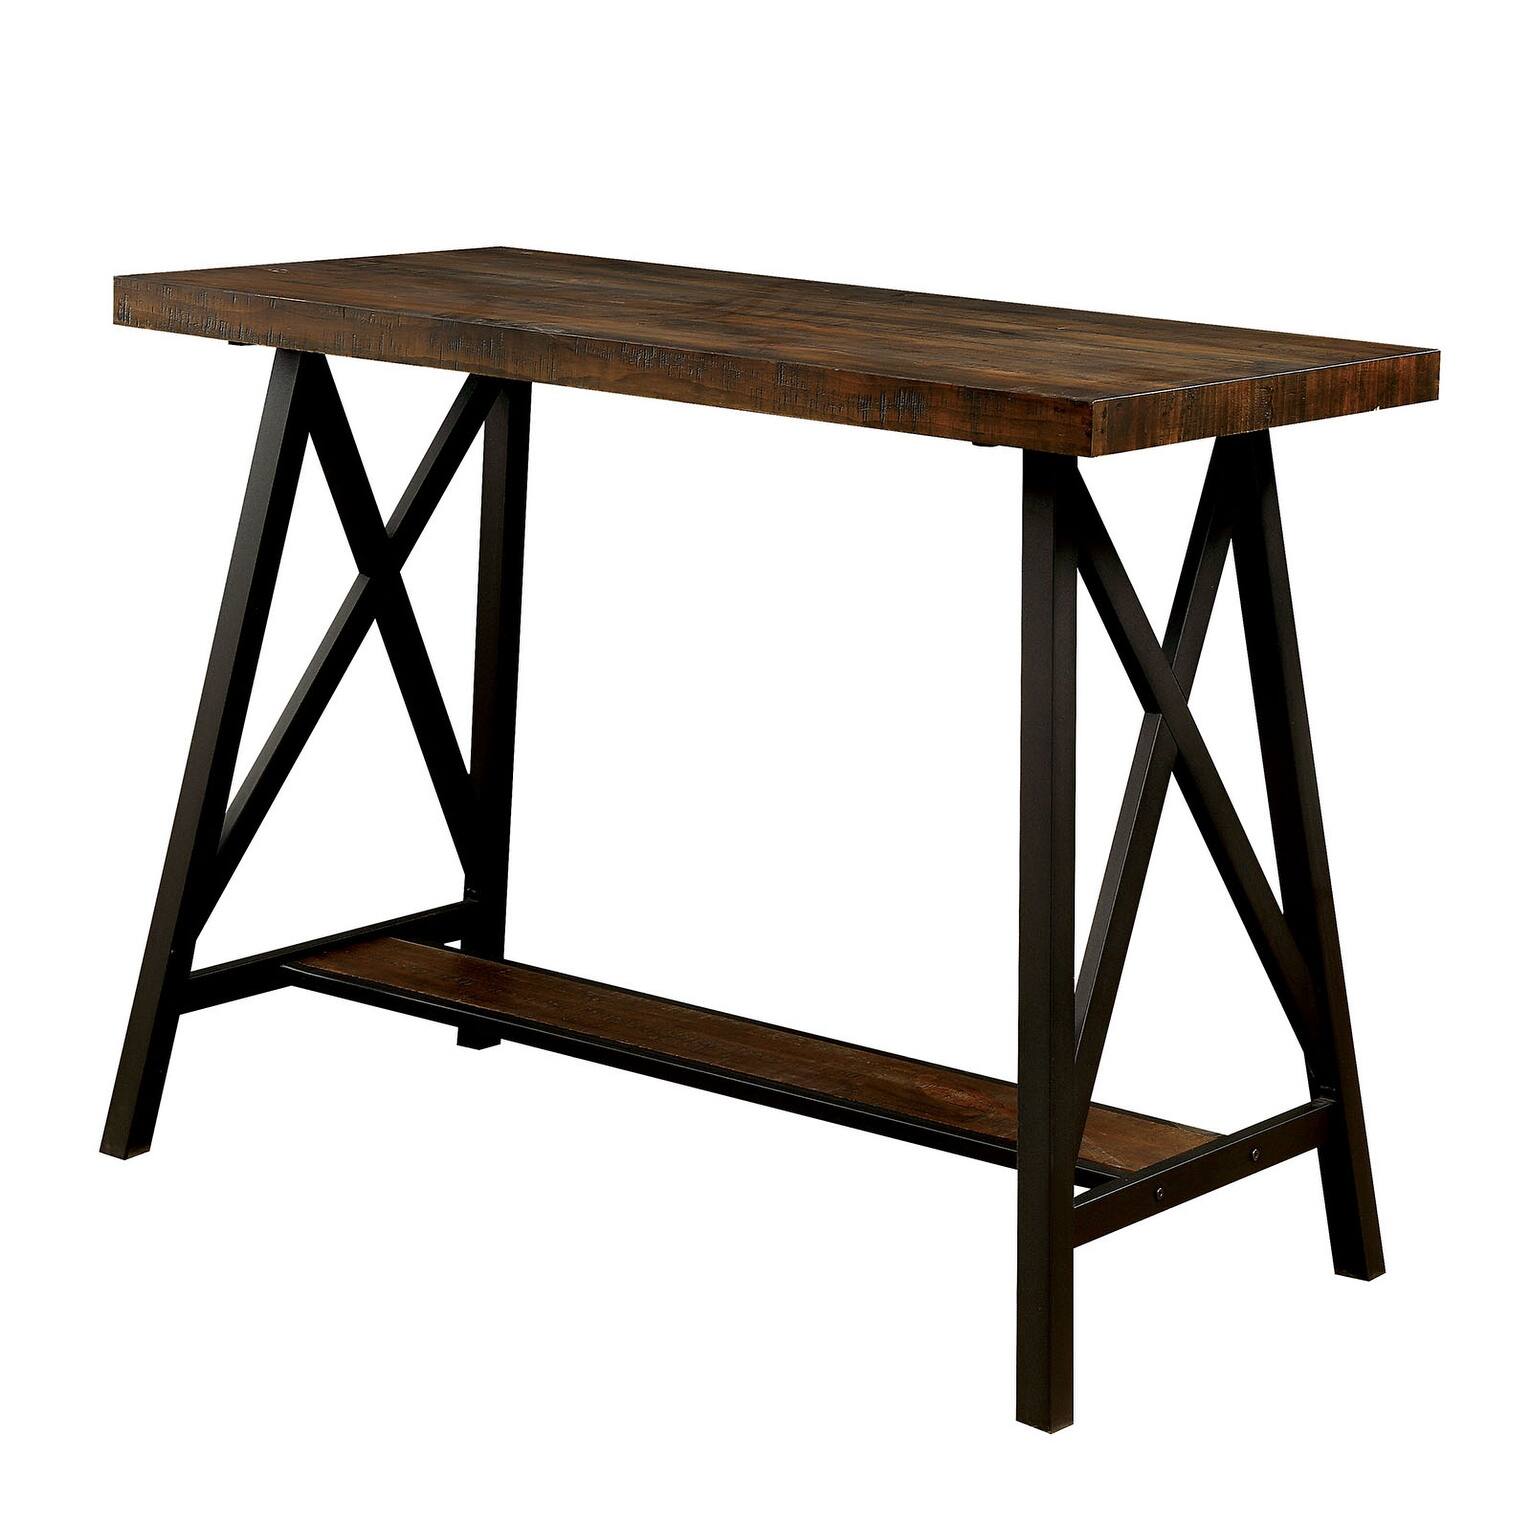 Wooden Counter Height Table With Angled Metal Legs, Black And Brown - 36 H x 23.63 W x 47.25 L Inches